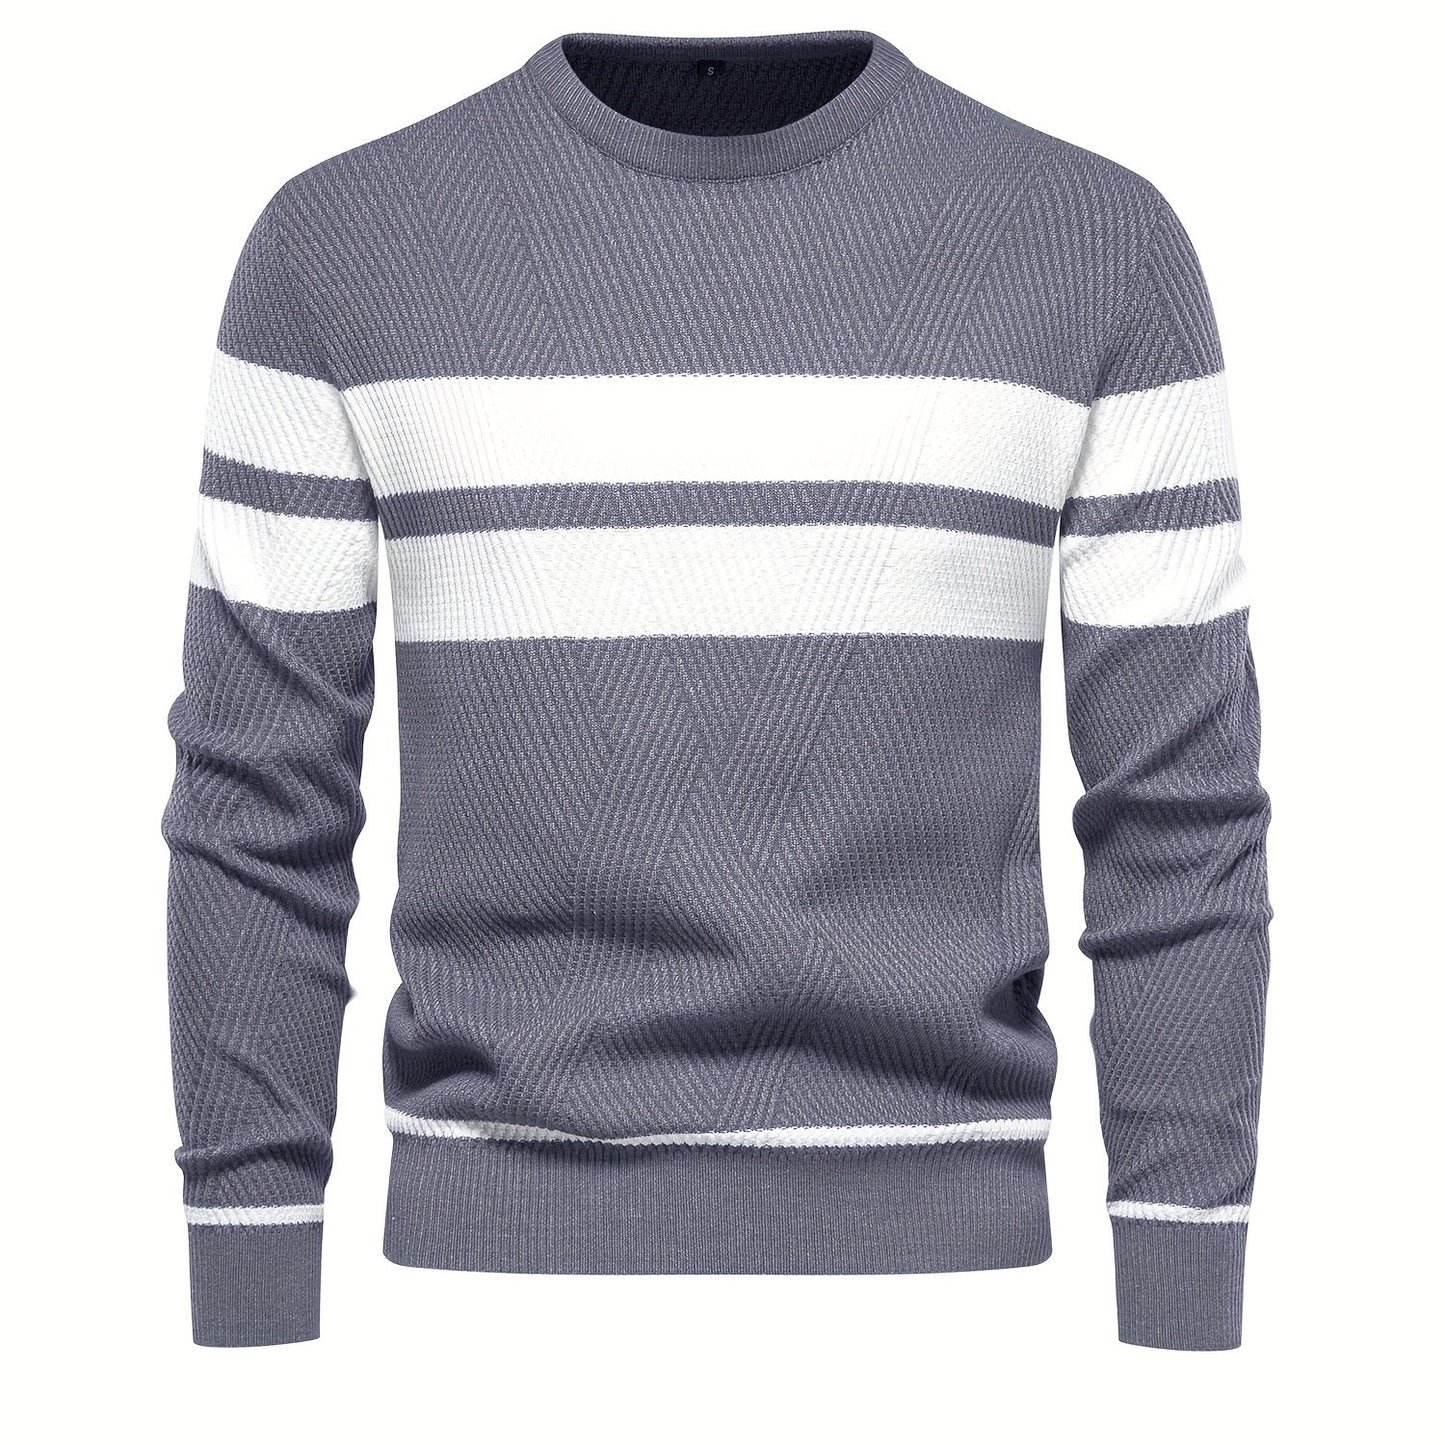 Foruwish - All Match Knitted Striped Pattern Sweater, Men's Casual Warm Slightly Stretch Crew Neck Pullover Sweater For Men Fall Winter